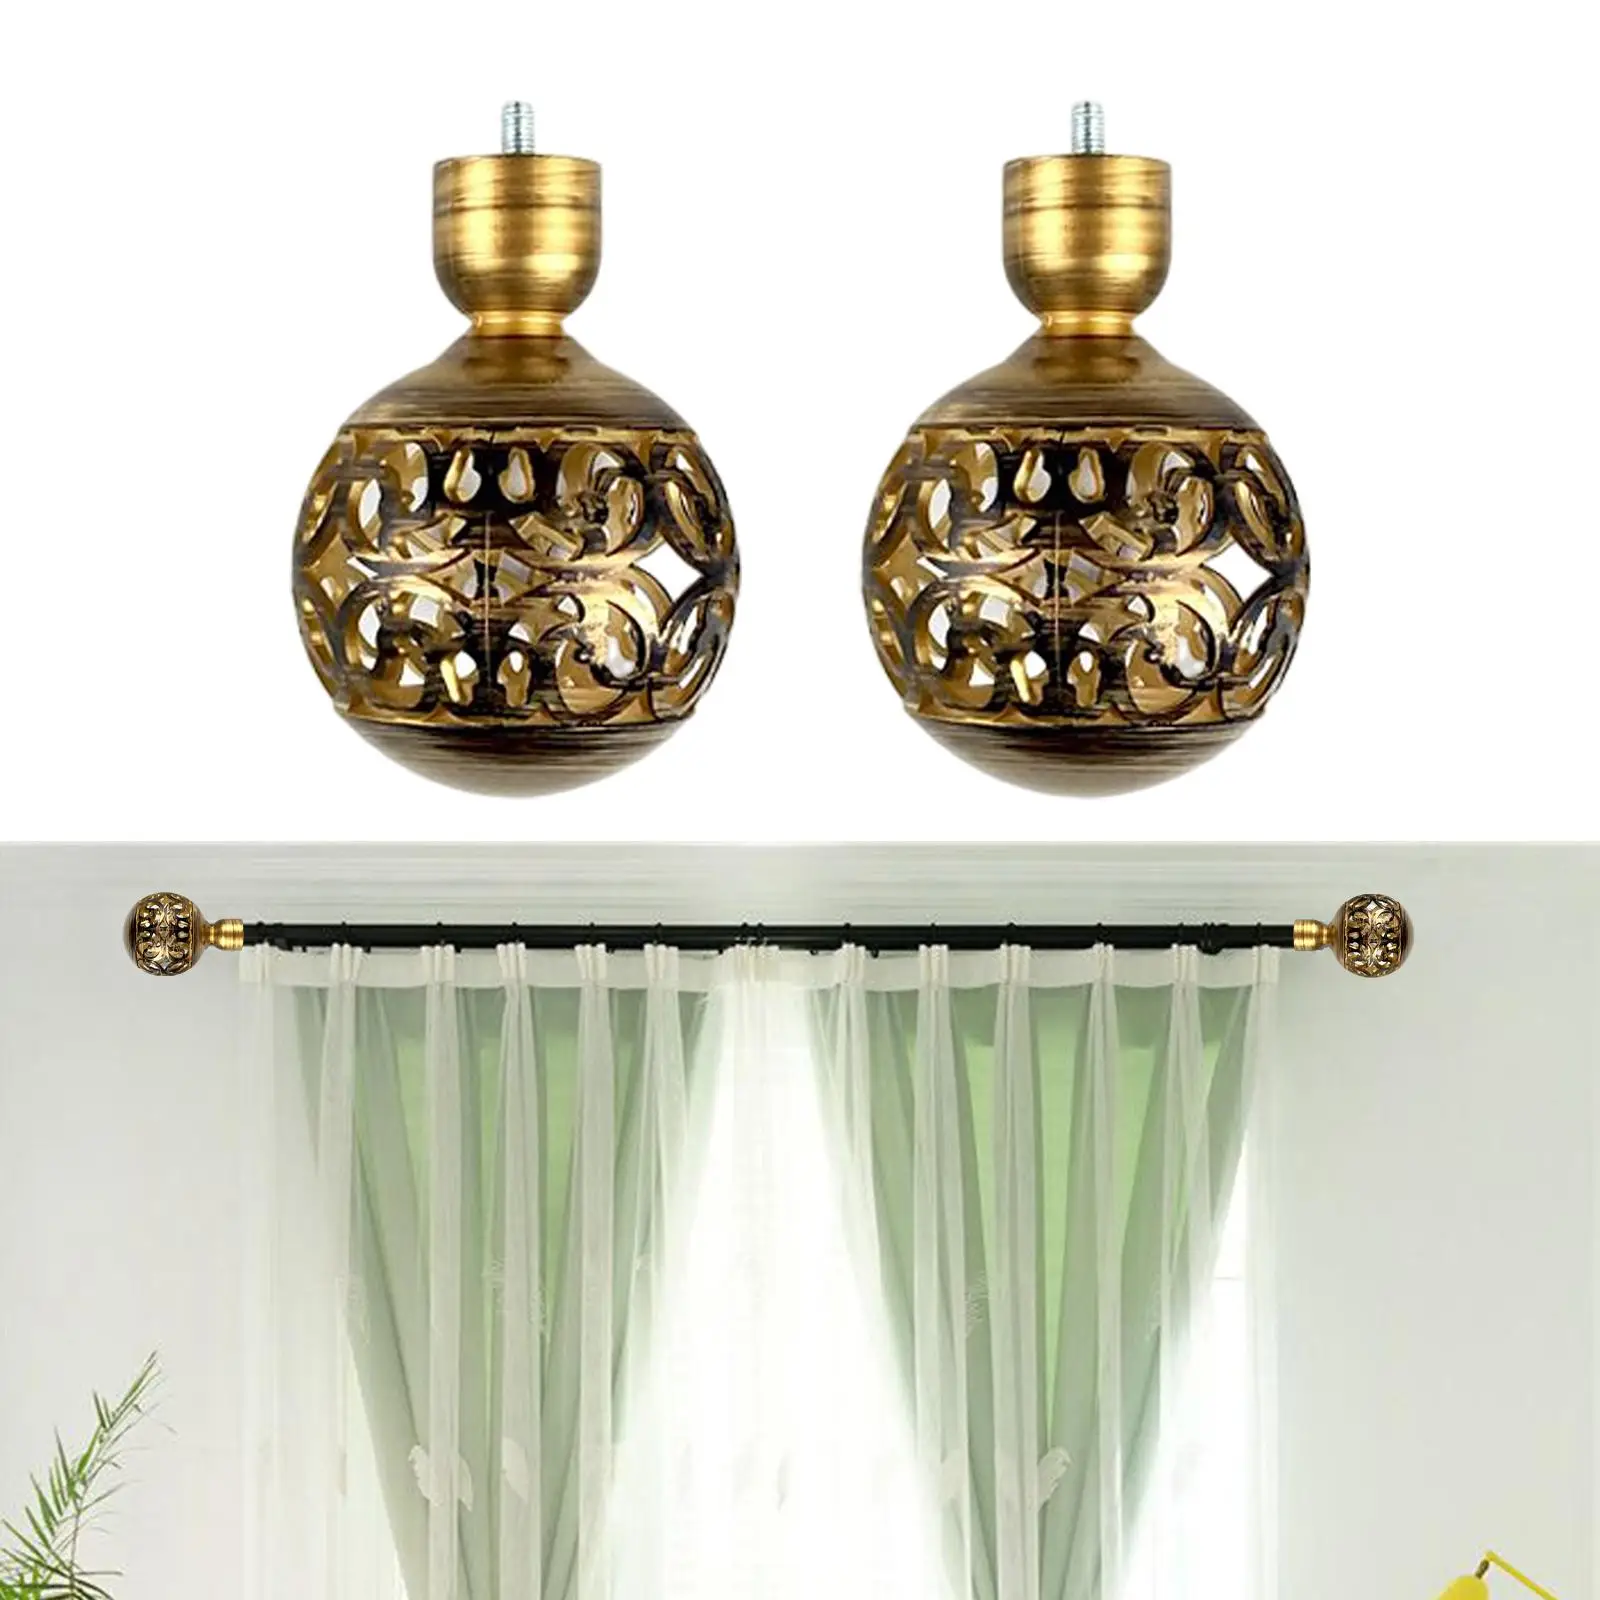 2Pcs Hollow Curtain Rod Finials 3/4 inch Diameter Decorative Vintage Drapery Rod Finials for Office Home Living Room Bathroom